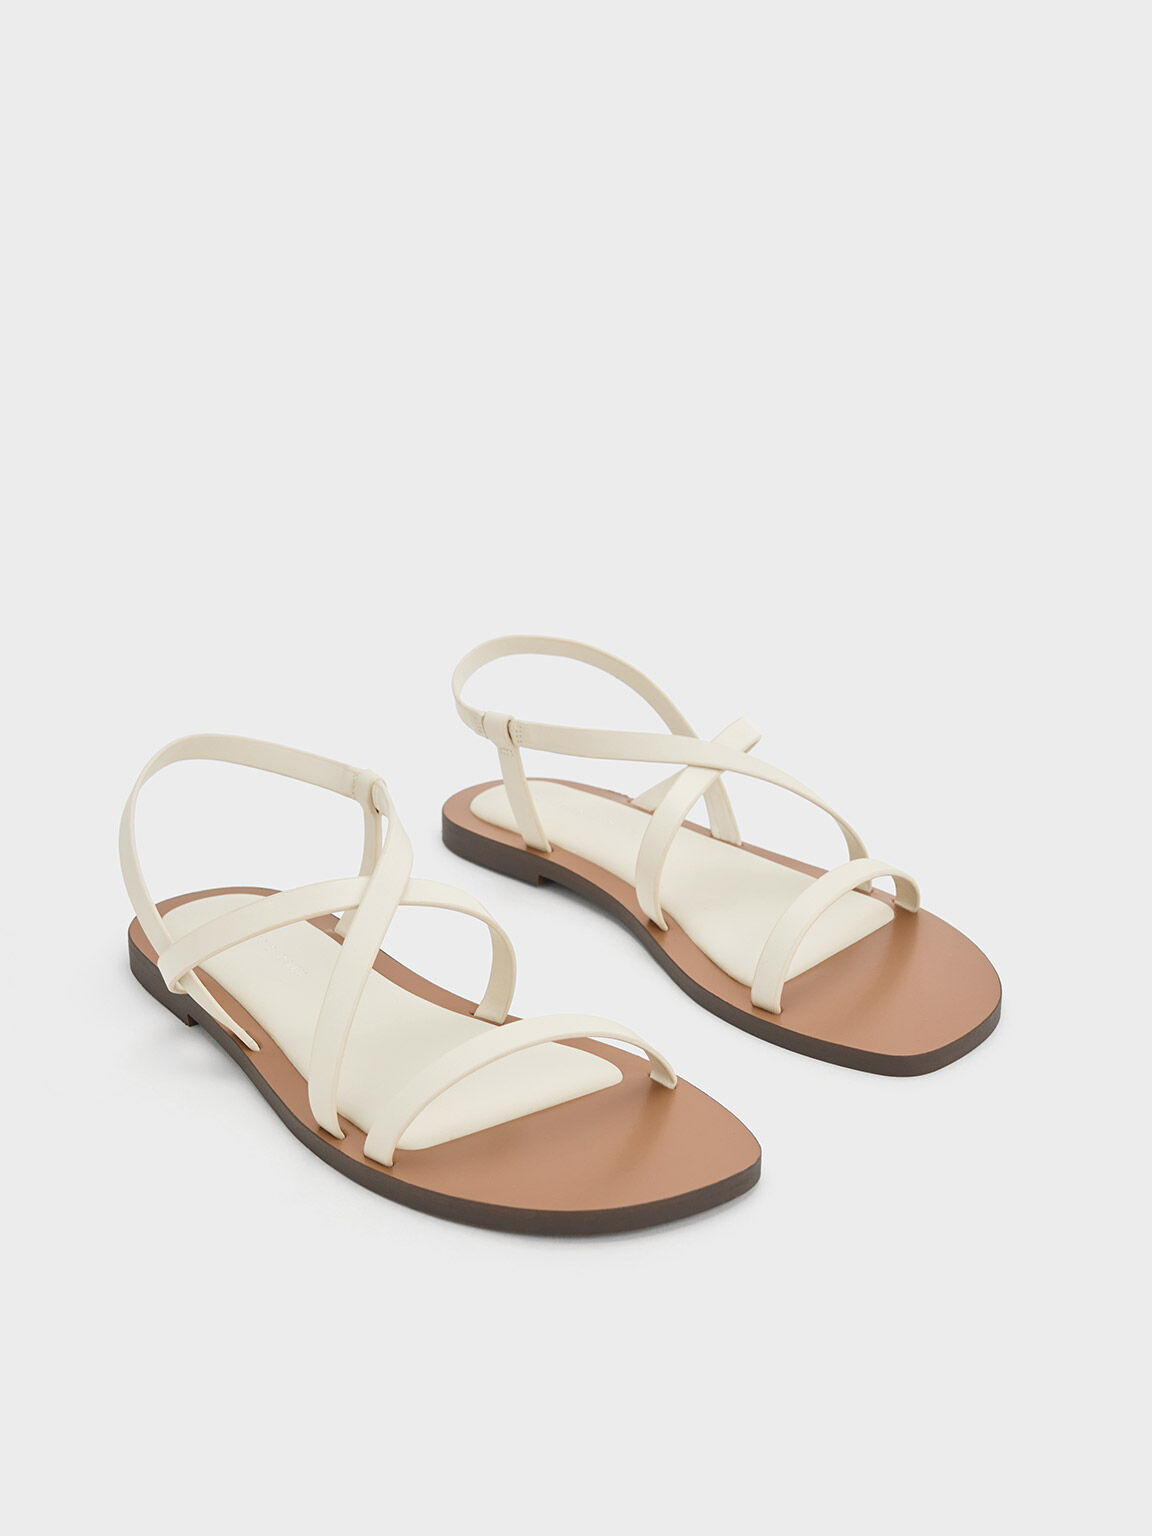 Cognac Crossover Back Strap Sandals - CHARLES & KEITH VN